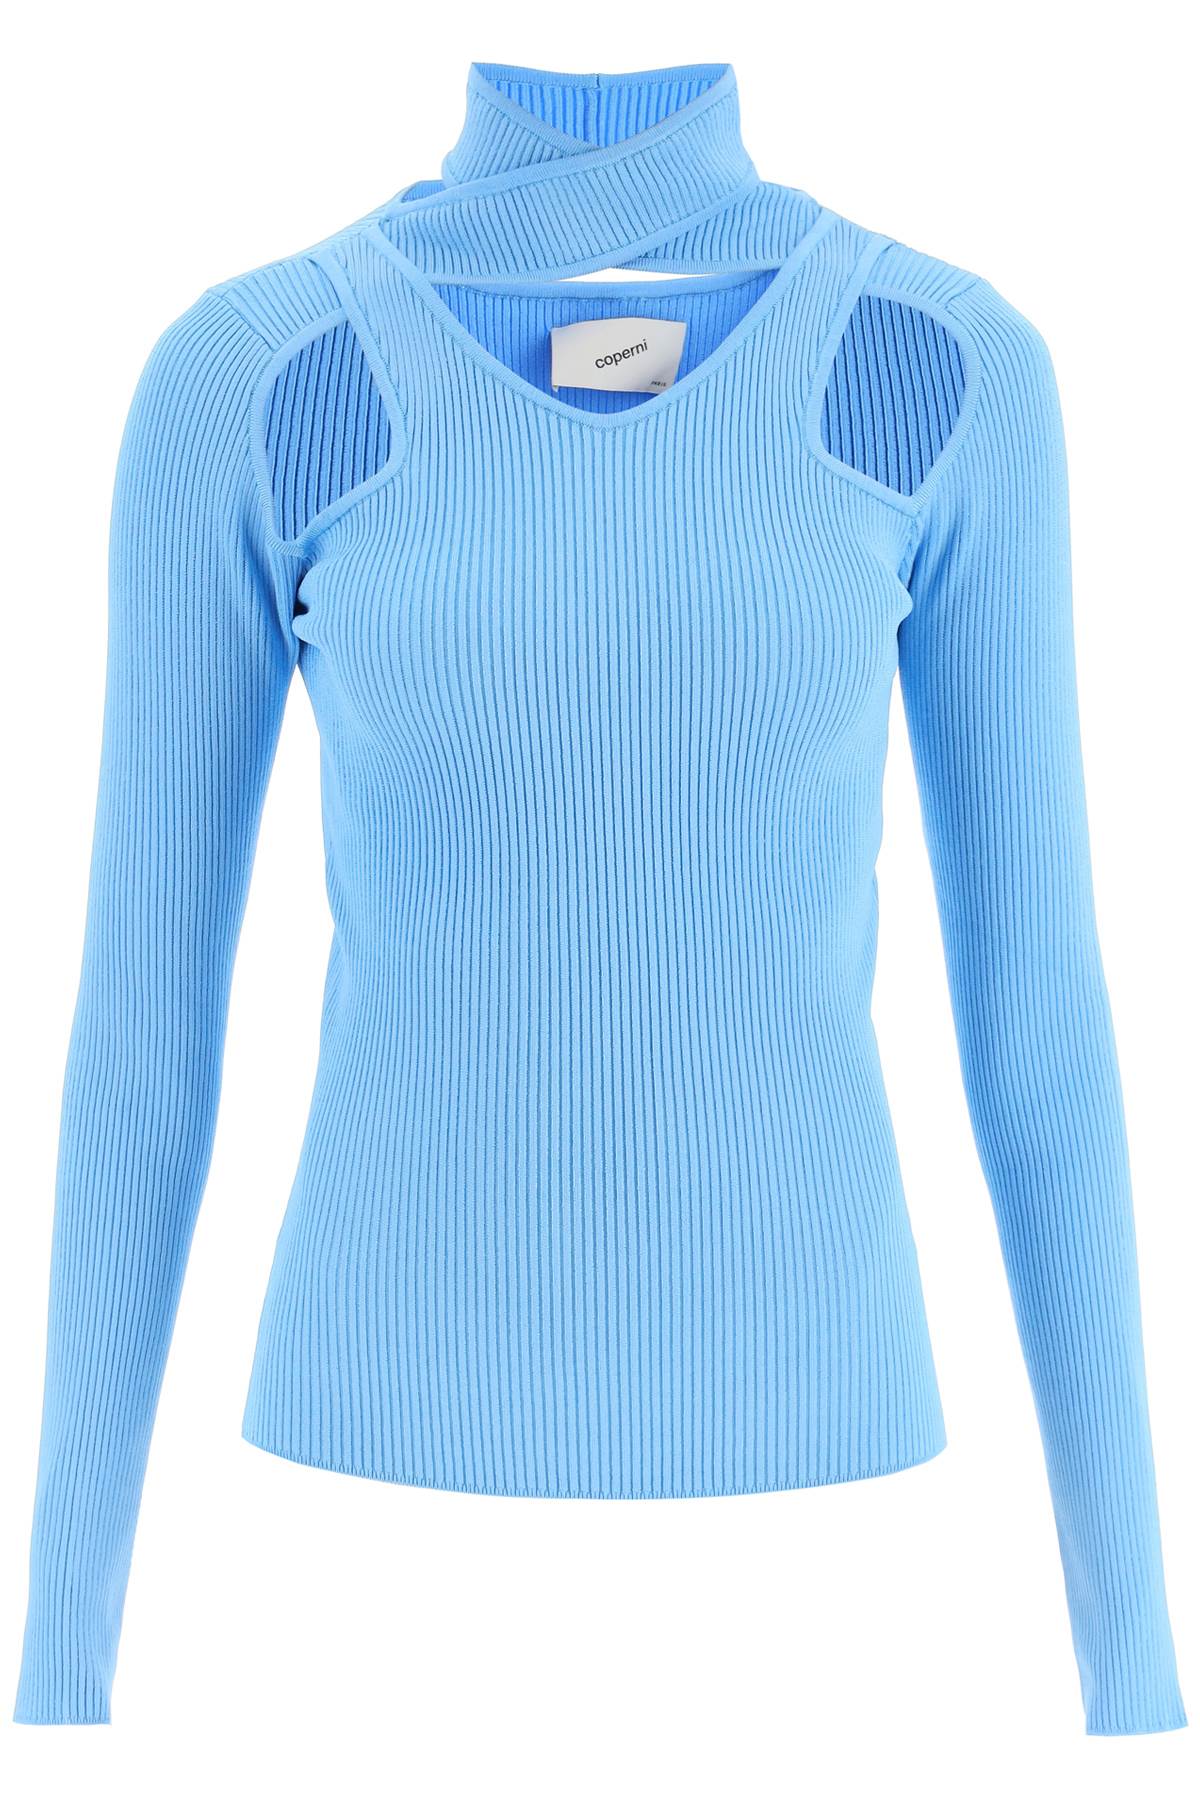 Coperni Knit Top With Cut-out Detail